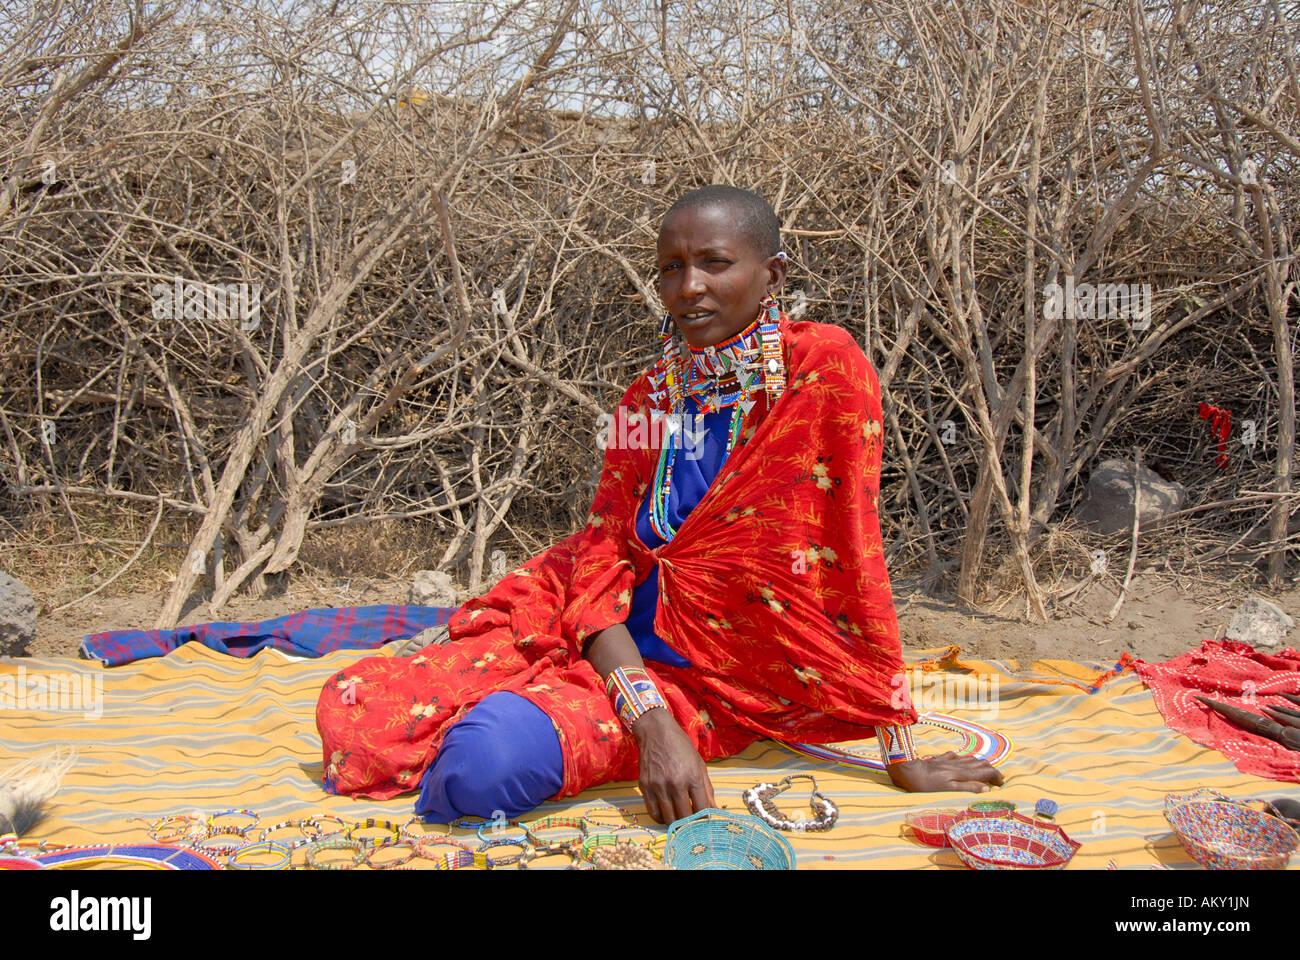 Masai woman dressed in a red cape sells souvenirs in the kraal Amboseli National Park Kenya Stock Photo